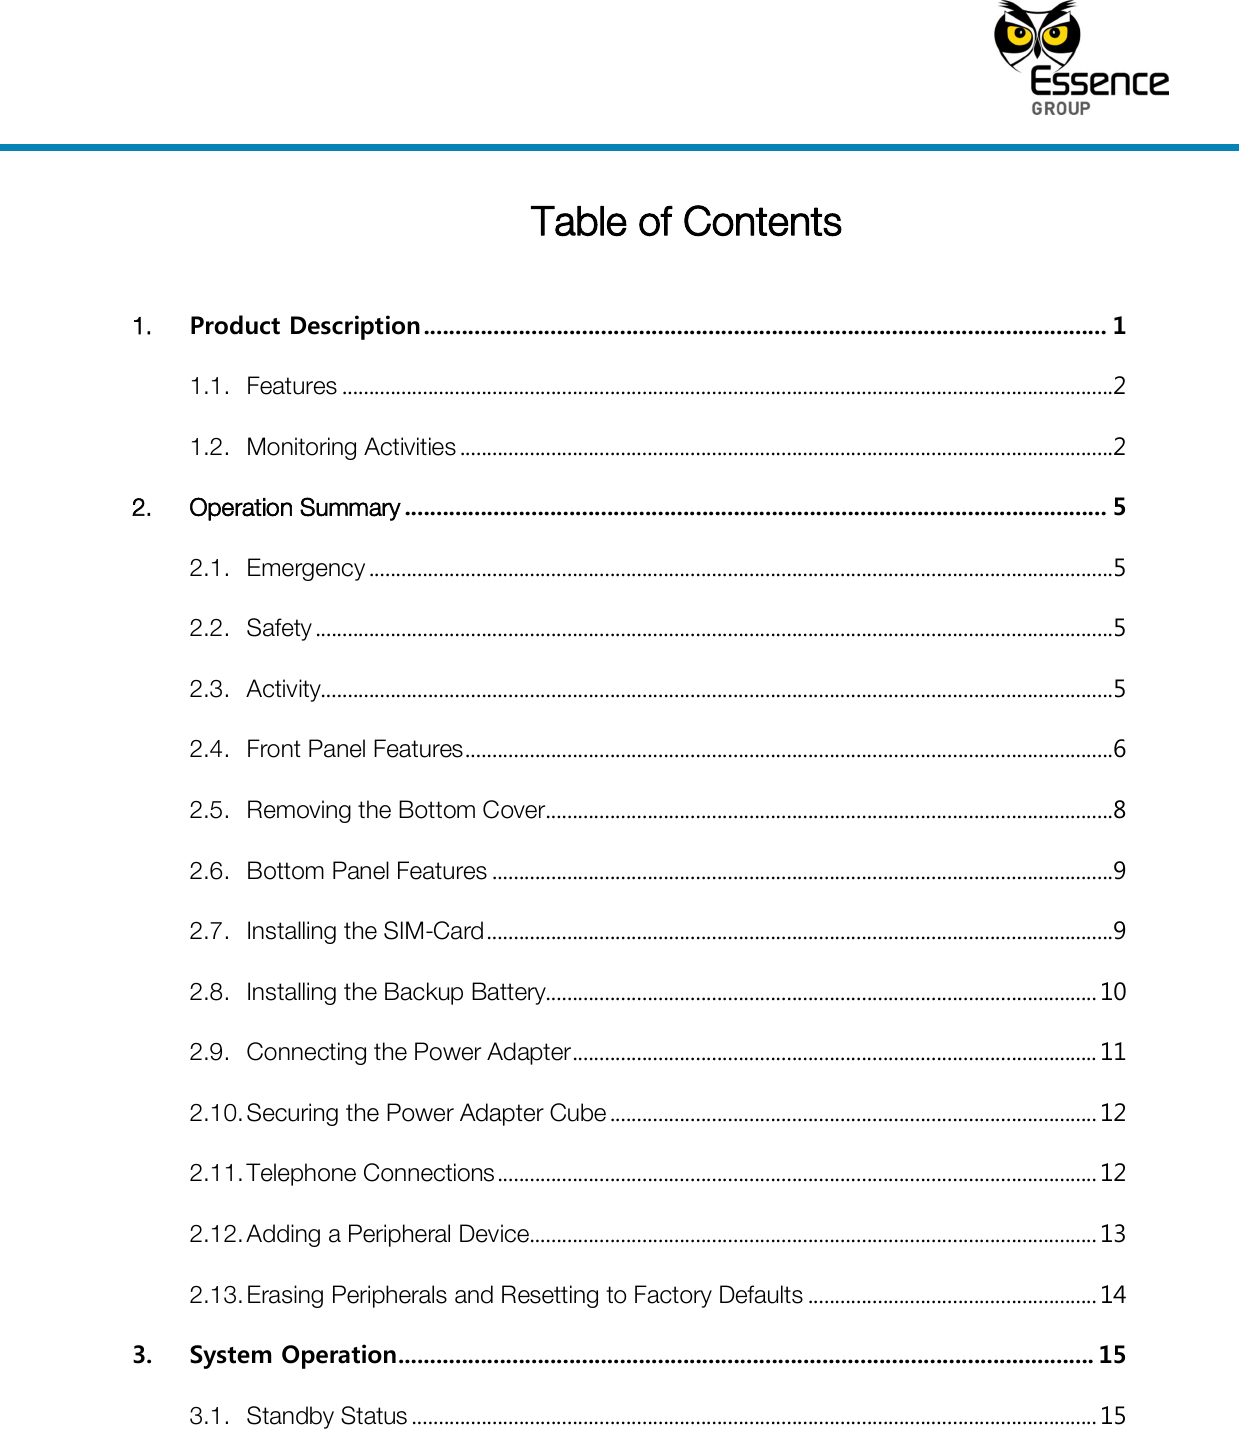     Table of Contents  1. Product Description ............................................................................................................ 1 1.1. Features ................................................................................................................................................2 1.2. Monitoring Activities ..........................................................................................................................2 2. Operation Summary ............................................................................................................... 5 2.1. Emergency ...........................................................................................................................................5 2.2. Safety .....................................................................................................................................................5 2.3. Activity....................................................................................................................................................5 2.4. Front Panel Features .........................................................................................................................6 2.5. Removing the Bottom Cover ..........................................................................................................8 2.6. Bottom Panel Features ....................................................................................................................9 2.7. Installing the SIM-Card .....................................................................................................................9 2.8. Installing the Backup Battery....................................................................................................... 10 2.9. Connecting the Power Adapter .................................................................................................. 11 2.10. Securing the Power Adapter Cube ........................................................................................... 12 2.11. Telephone Connections ................................................................................................................ 12 2.12. Adding a Peripheral Device .......................................................................................................... 13 2.13. Erasing Peripherals and Resetting to Factory Defaults ...................................................... 14 3. System Operation .............................................................................................................. 15 3.1. Standby Status ................................................................................................................................ 15 